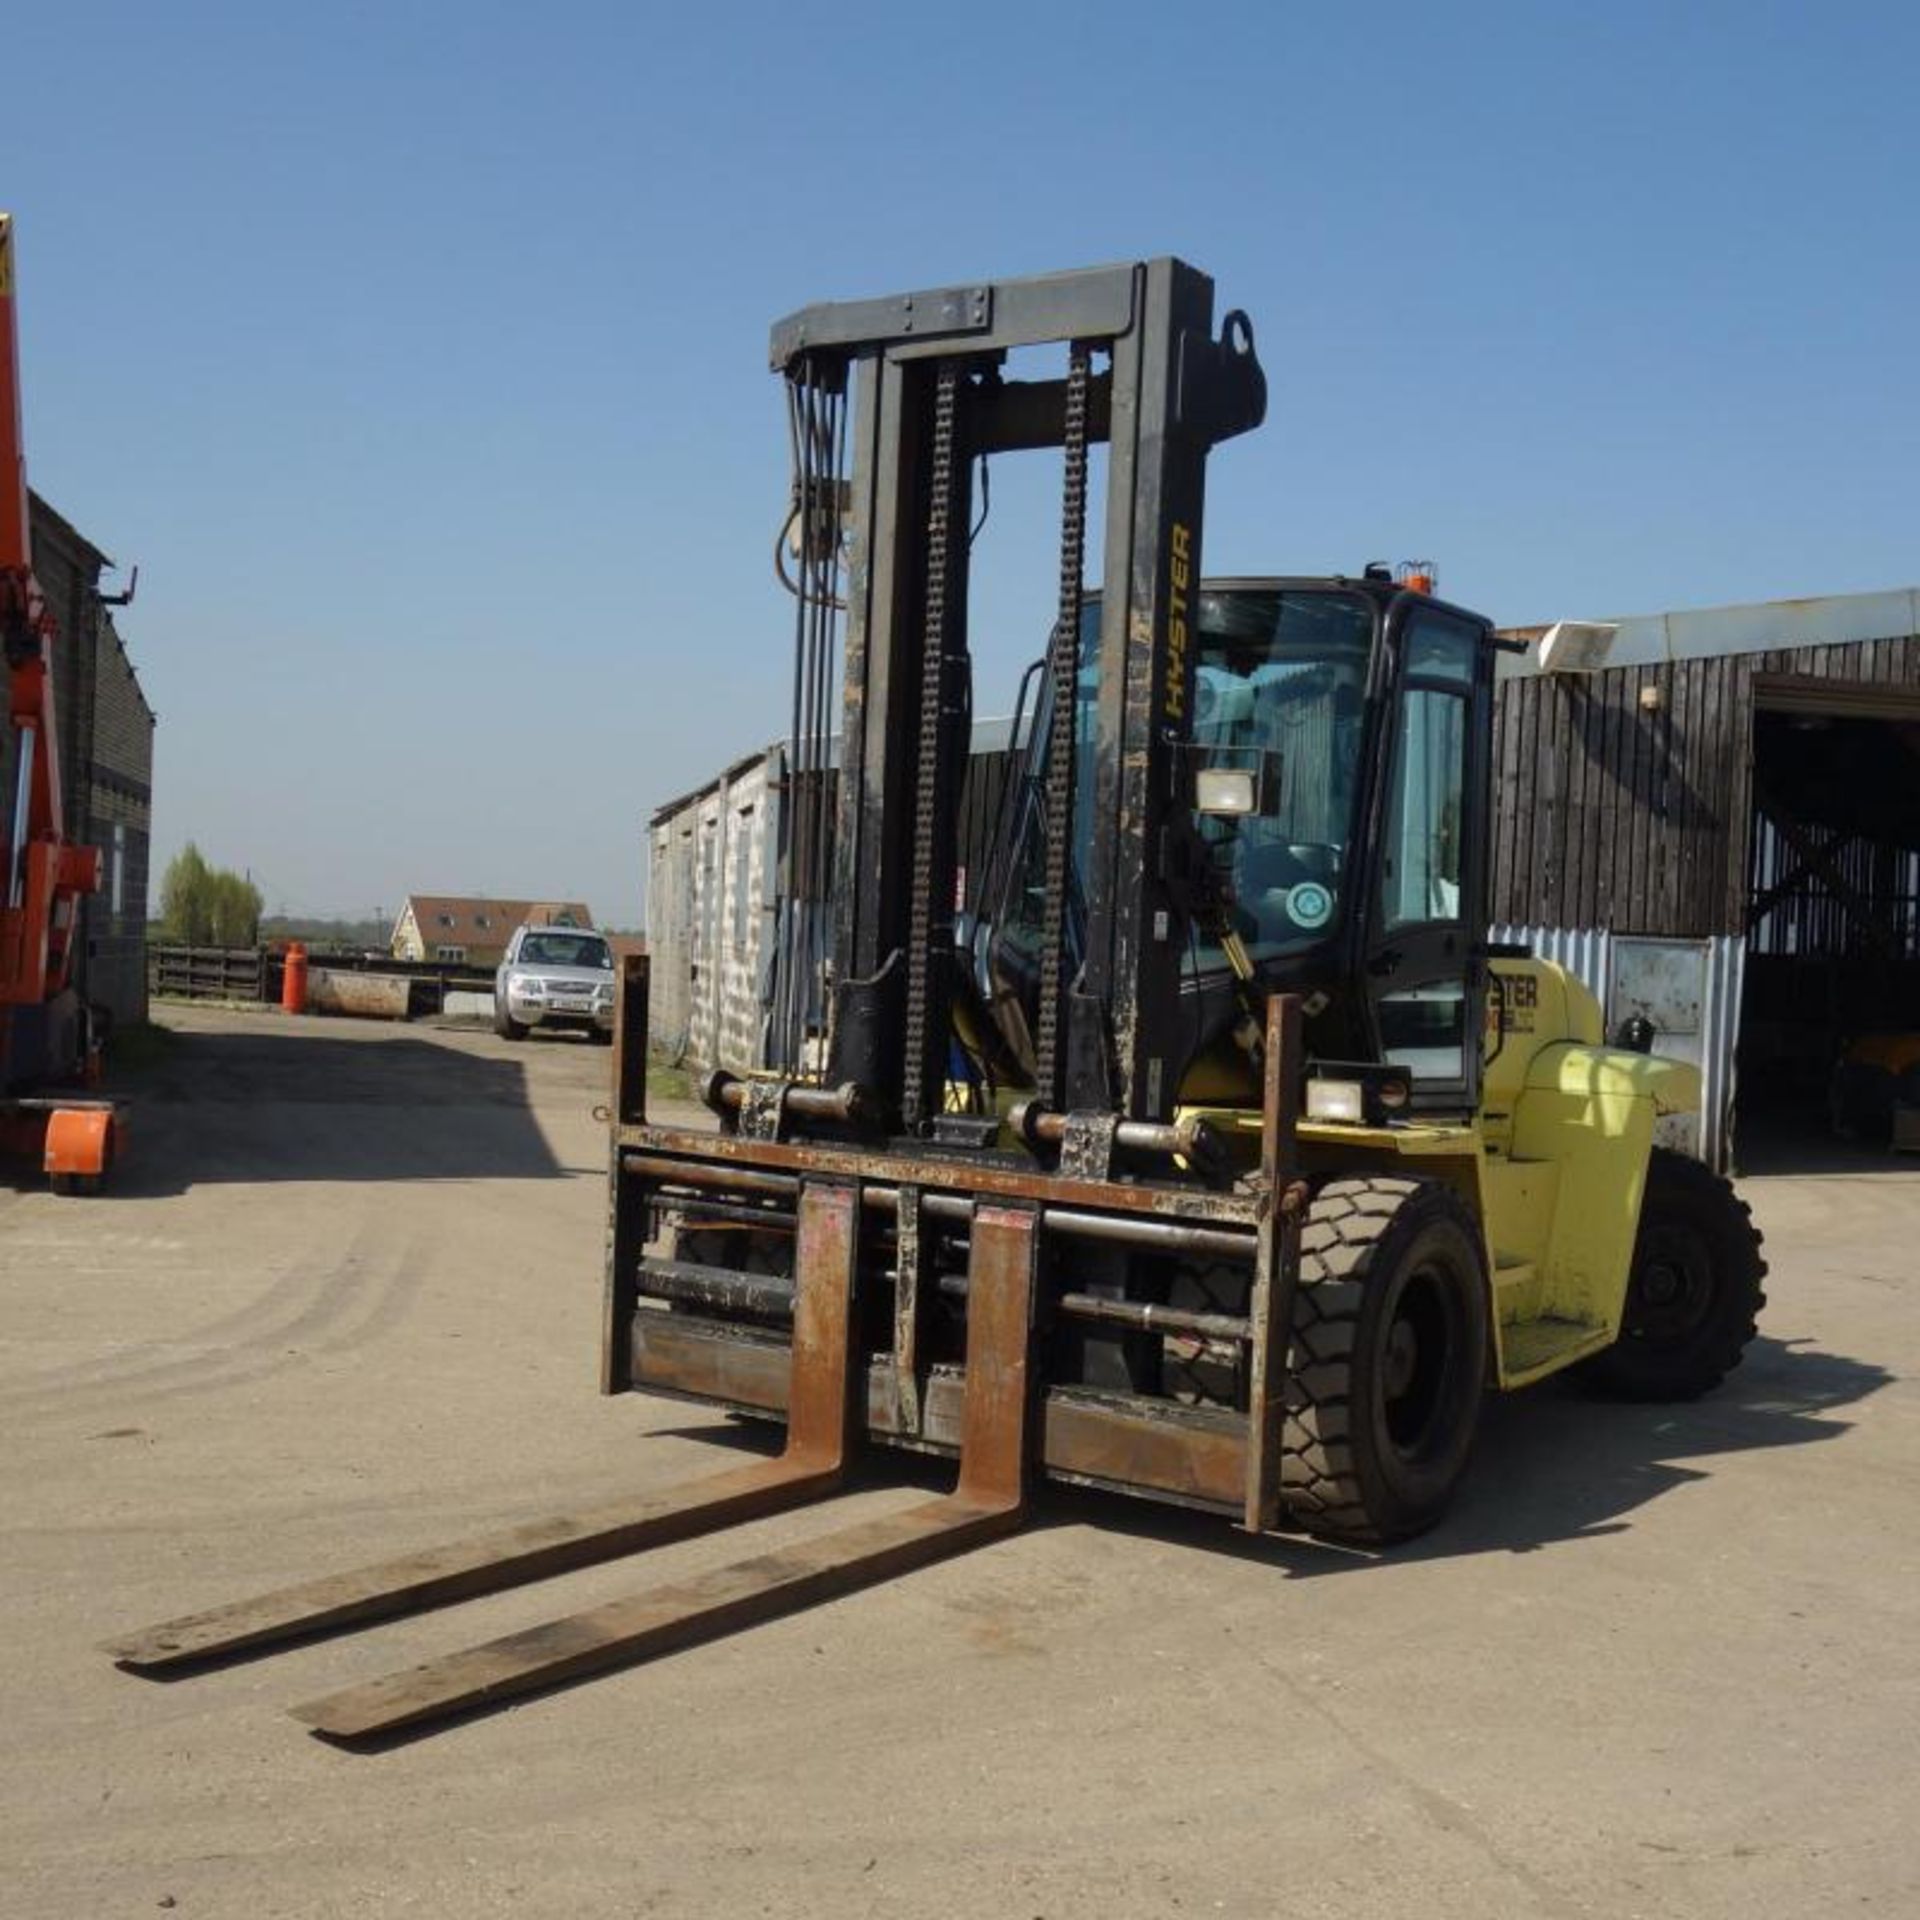 2006 Hyster M12.00xm 12 Ton Forklift, 8151 Hours From New - Image 4 of 5